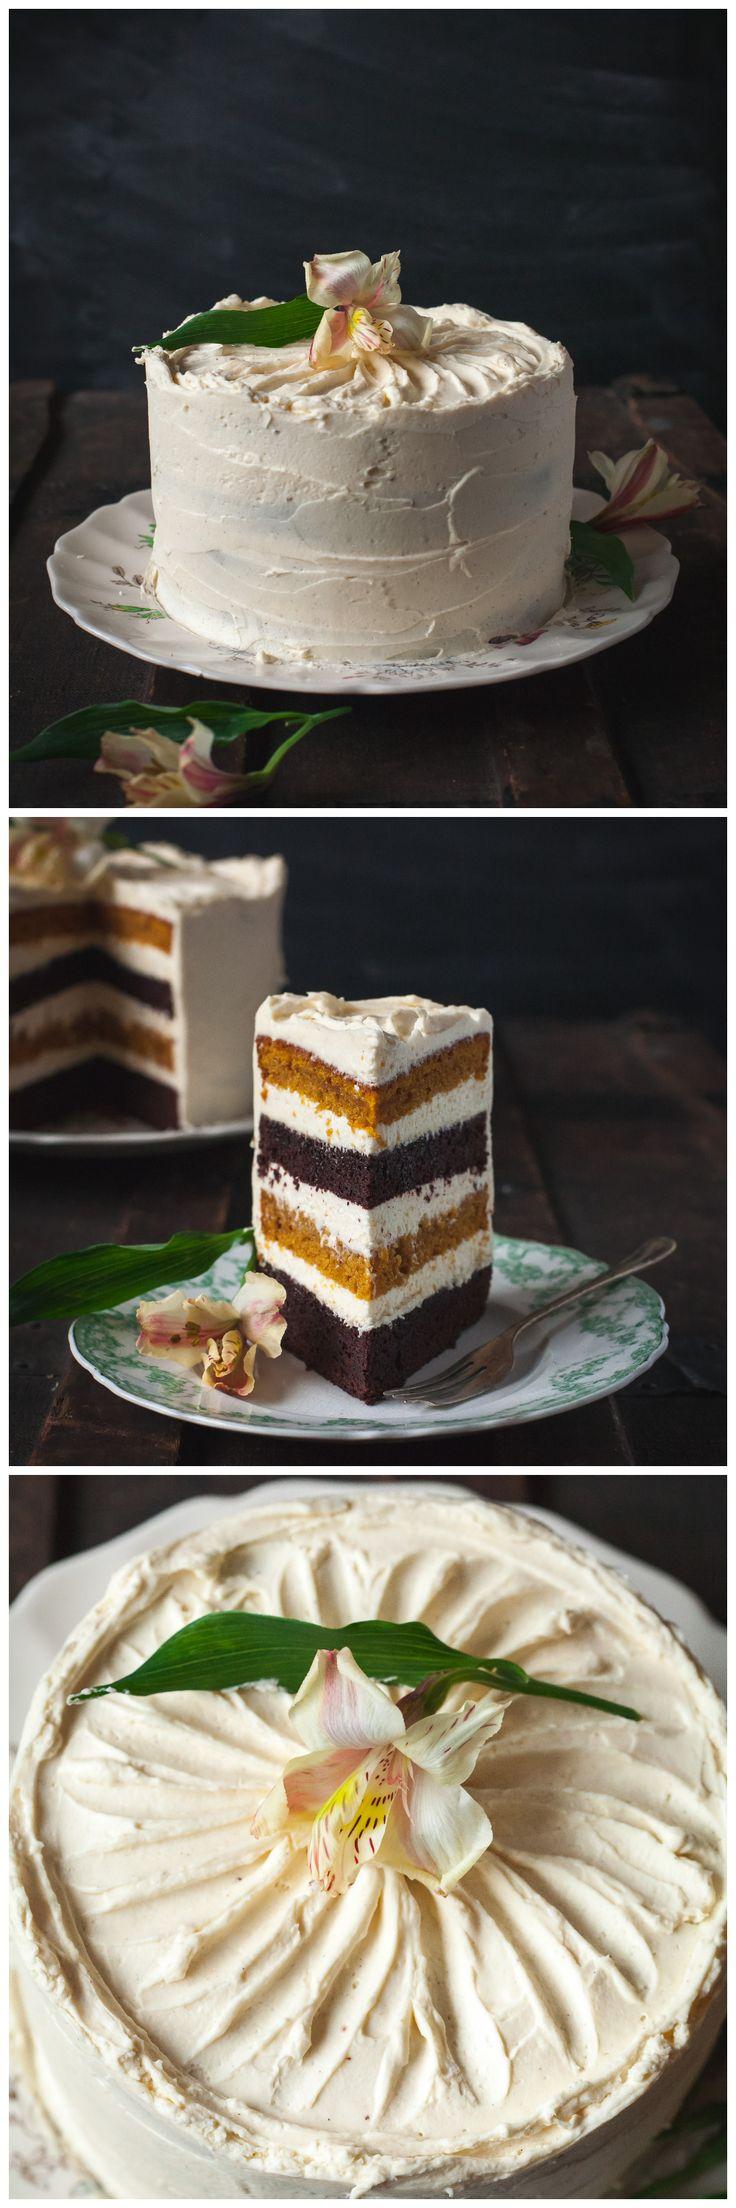 Mariage - Spiced Pumpkin And Chocolate Cake With Maple Cinnamon Mascarpone Frosting